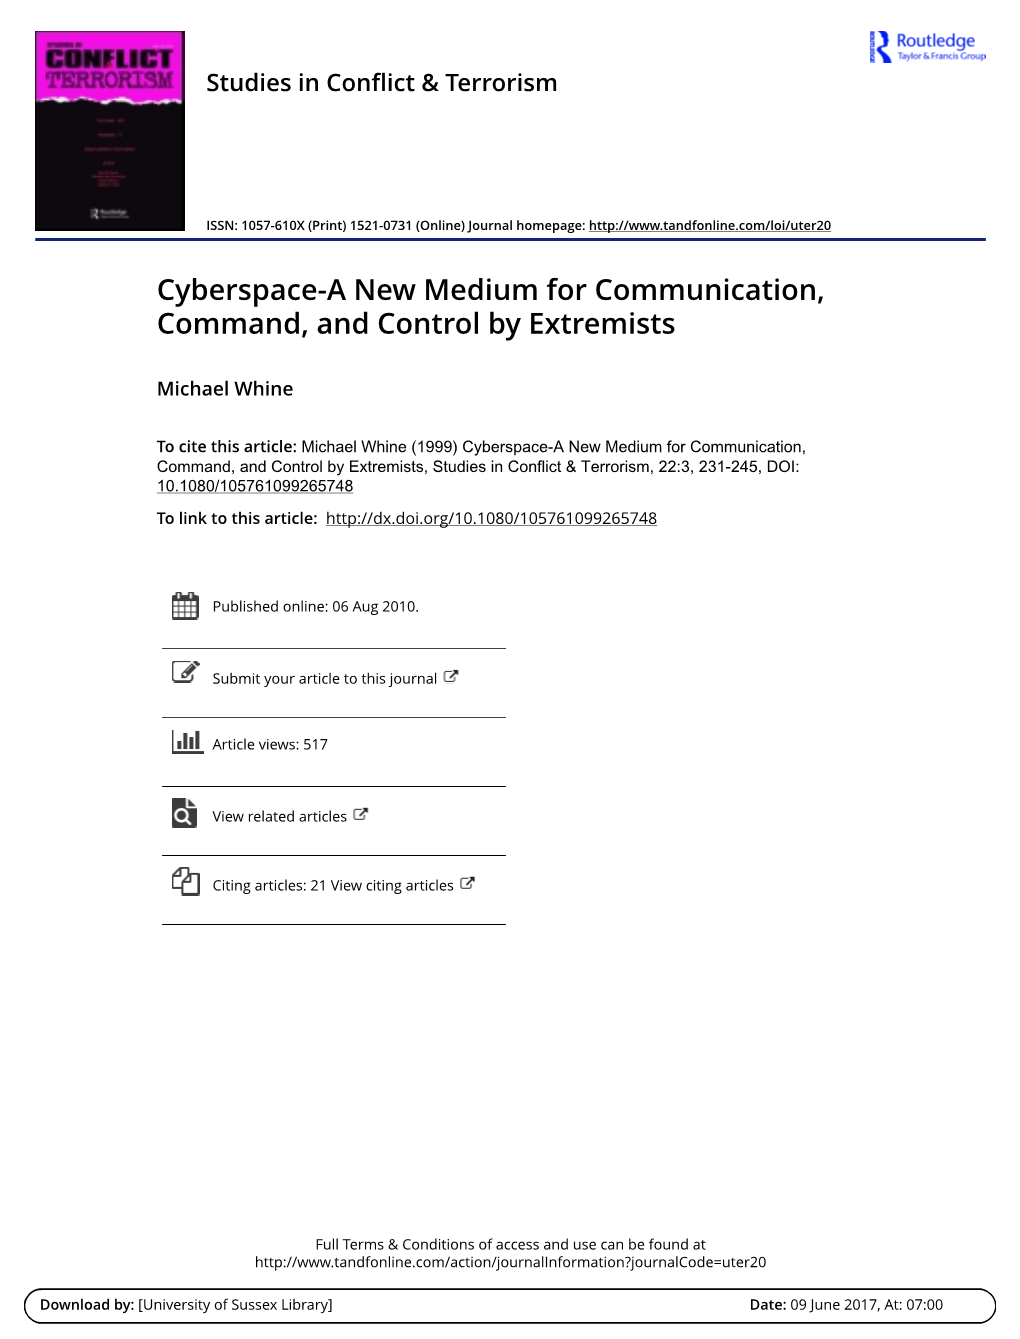 Cyberspace-A New Medium for Communication, Command, and Control by Extremists